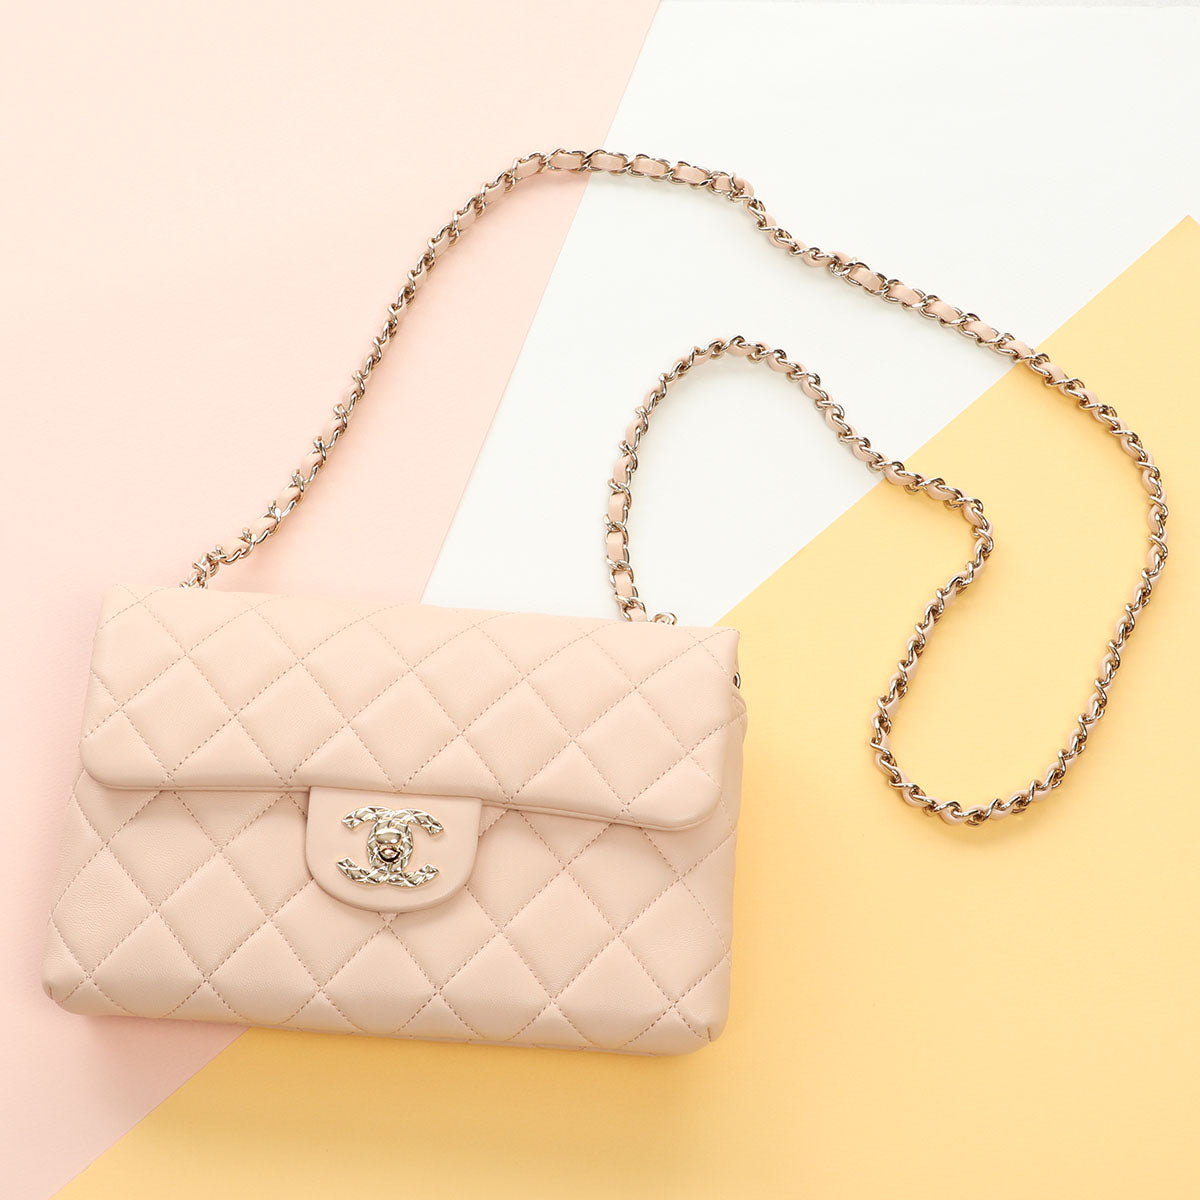 Chanel Mini Robin's Egg Blue Part-Quilted Calfskin Crossbody by Ann's Fabulous Finds